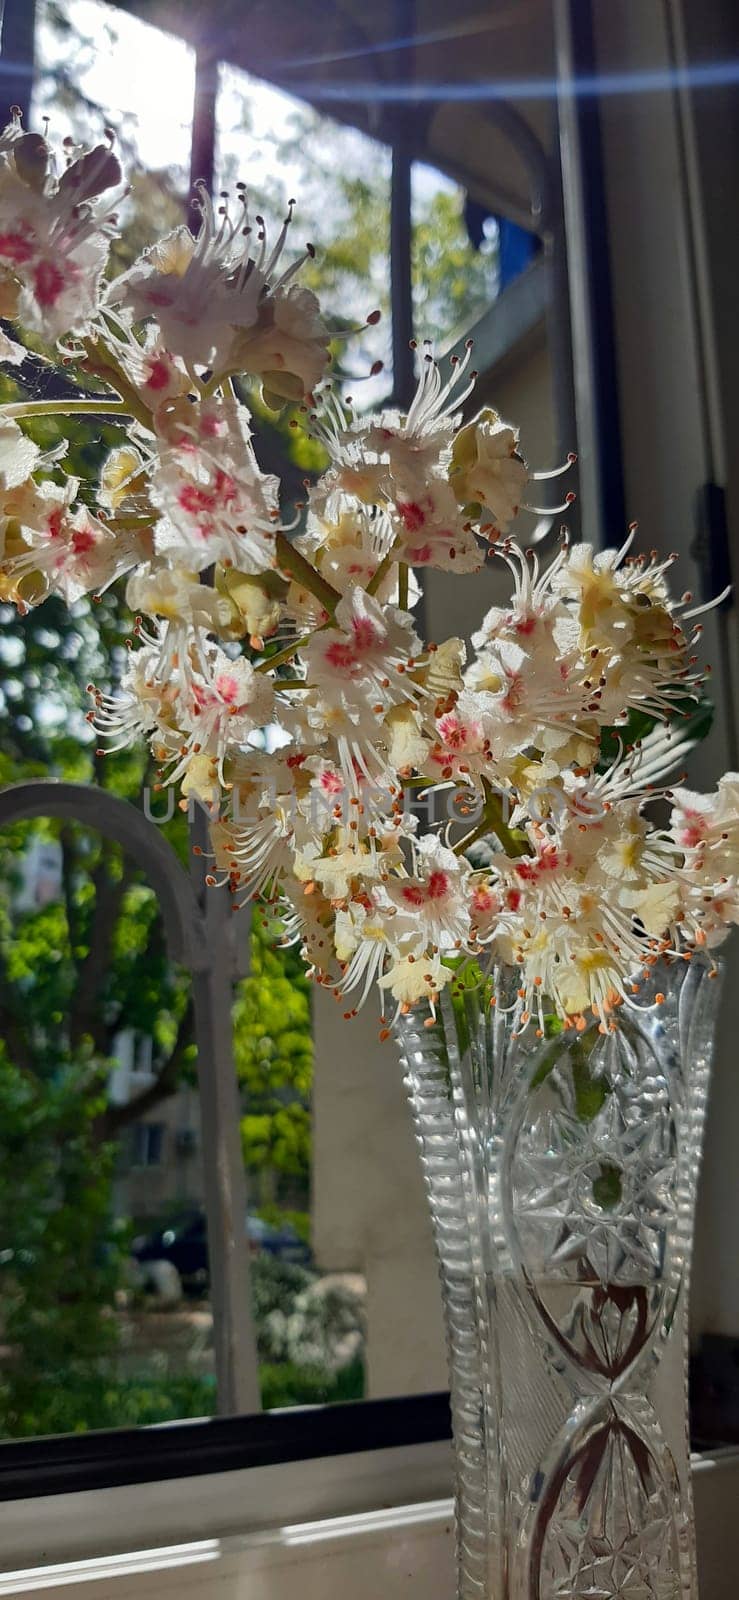 The chestnut tree blooms with white, very beautiful flowers.